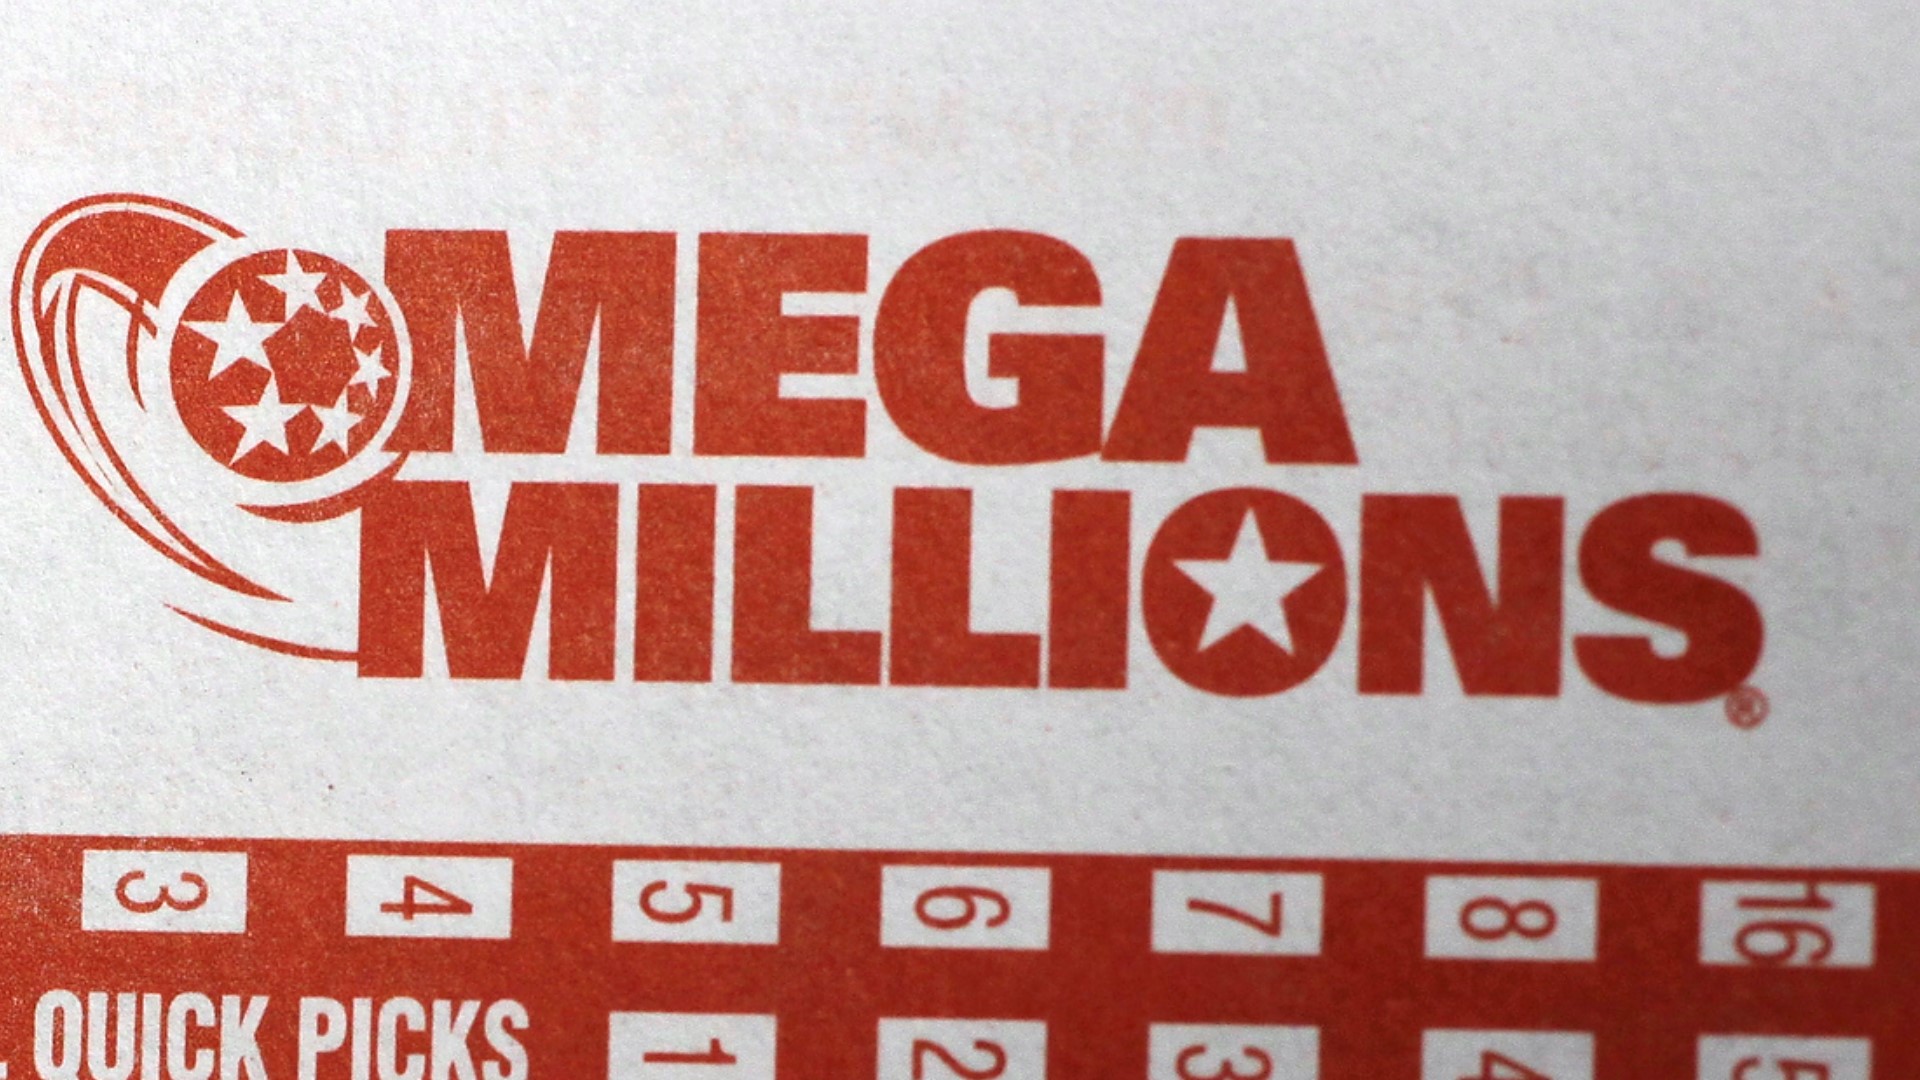 We have a winner! There was one lucky ticket worth $1 million sold at a Shell gas station in Brook Park.